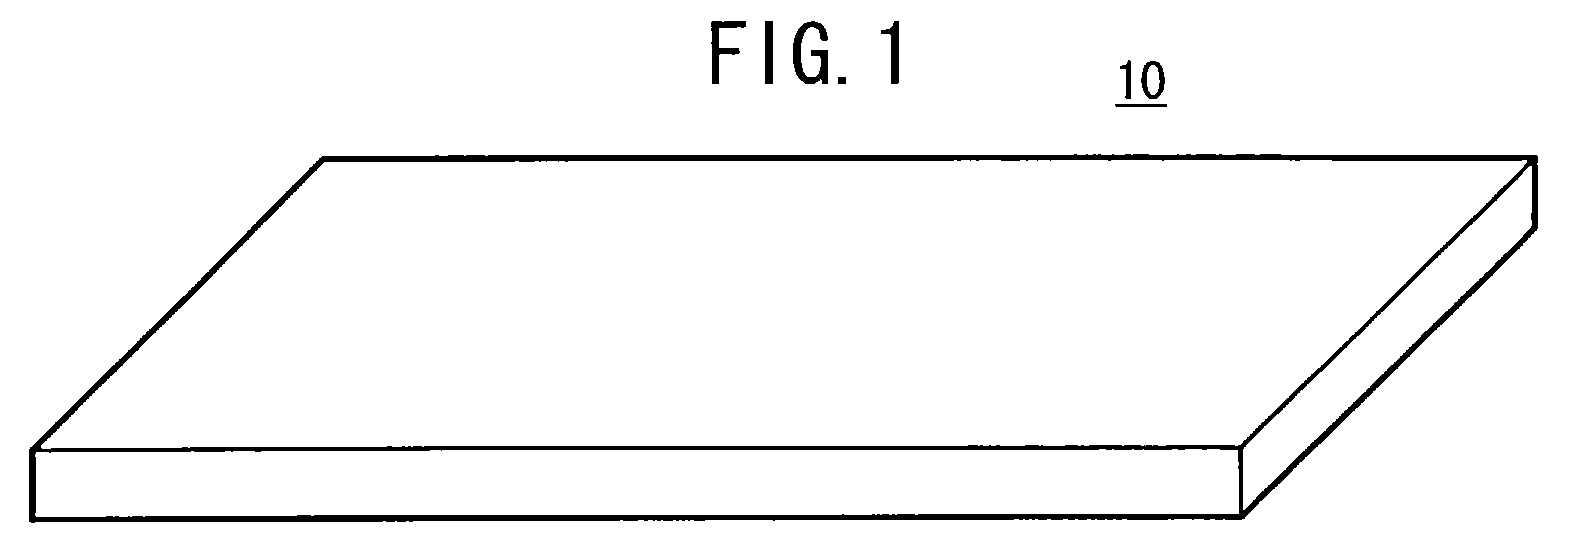 Proton conductive solid polymer electrolyte and method for producing the same